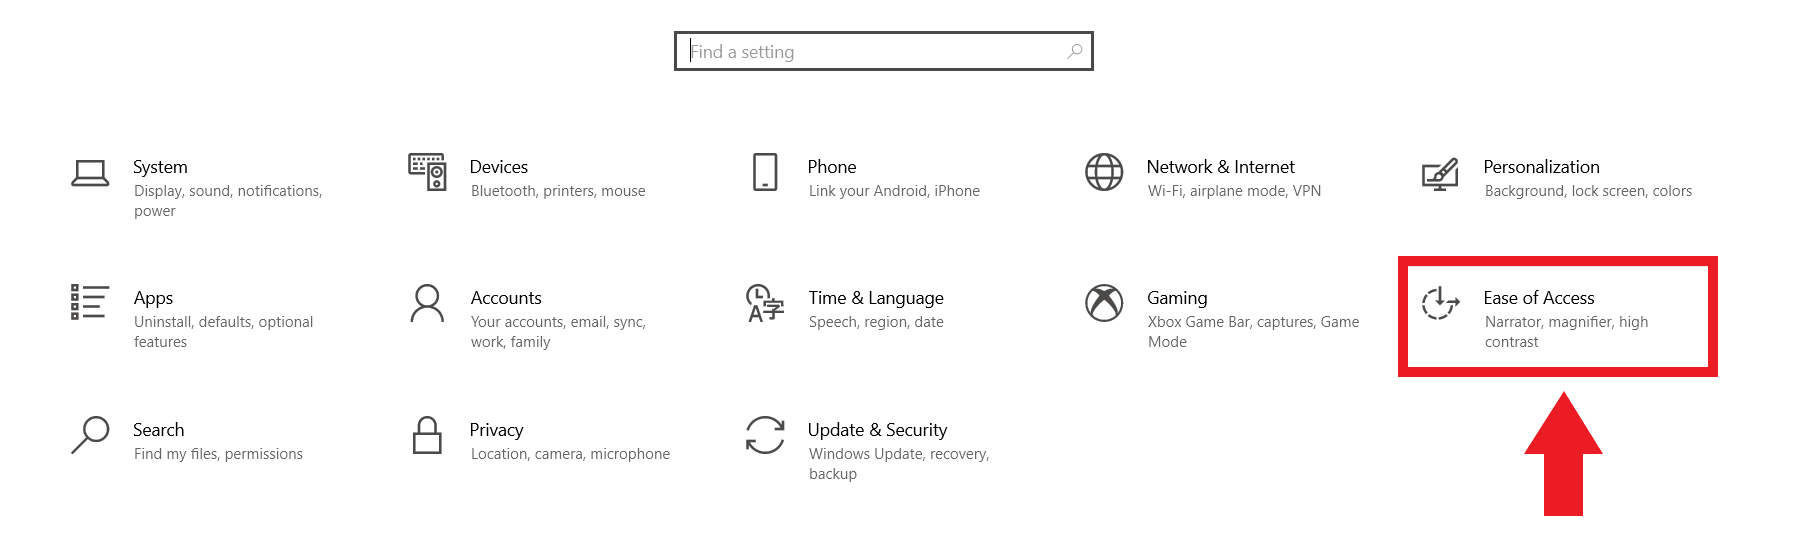 In the Settings menu, click the “Ease of Access” field